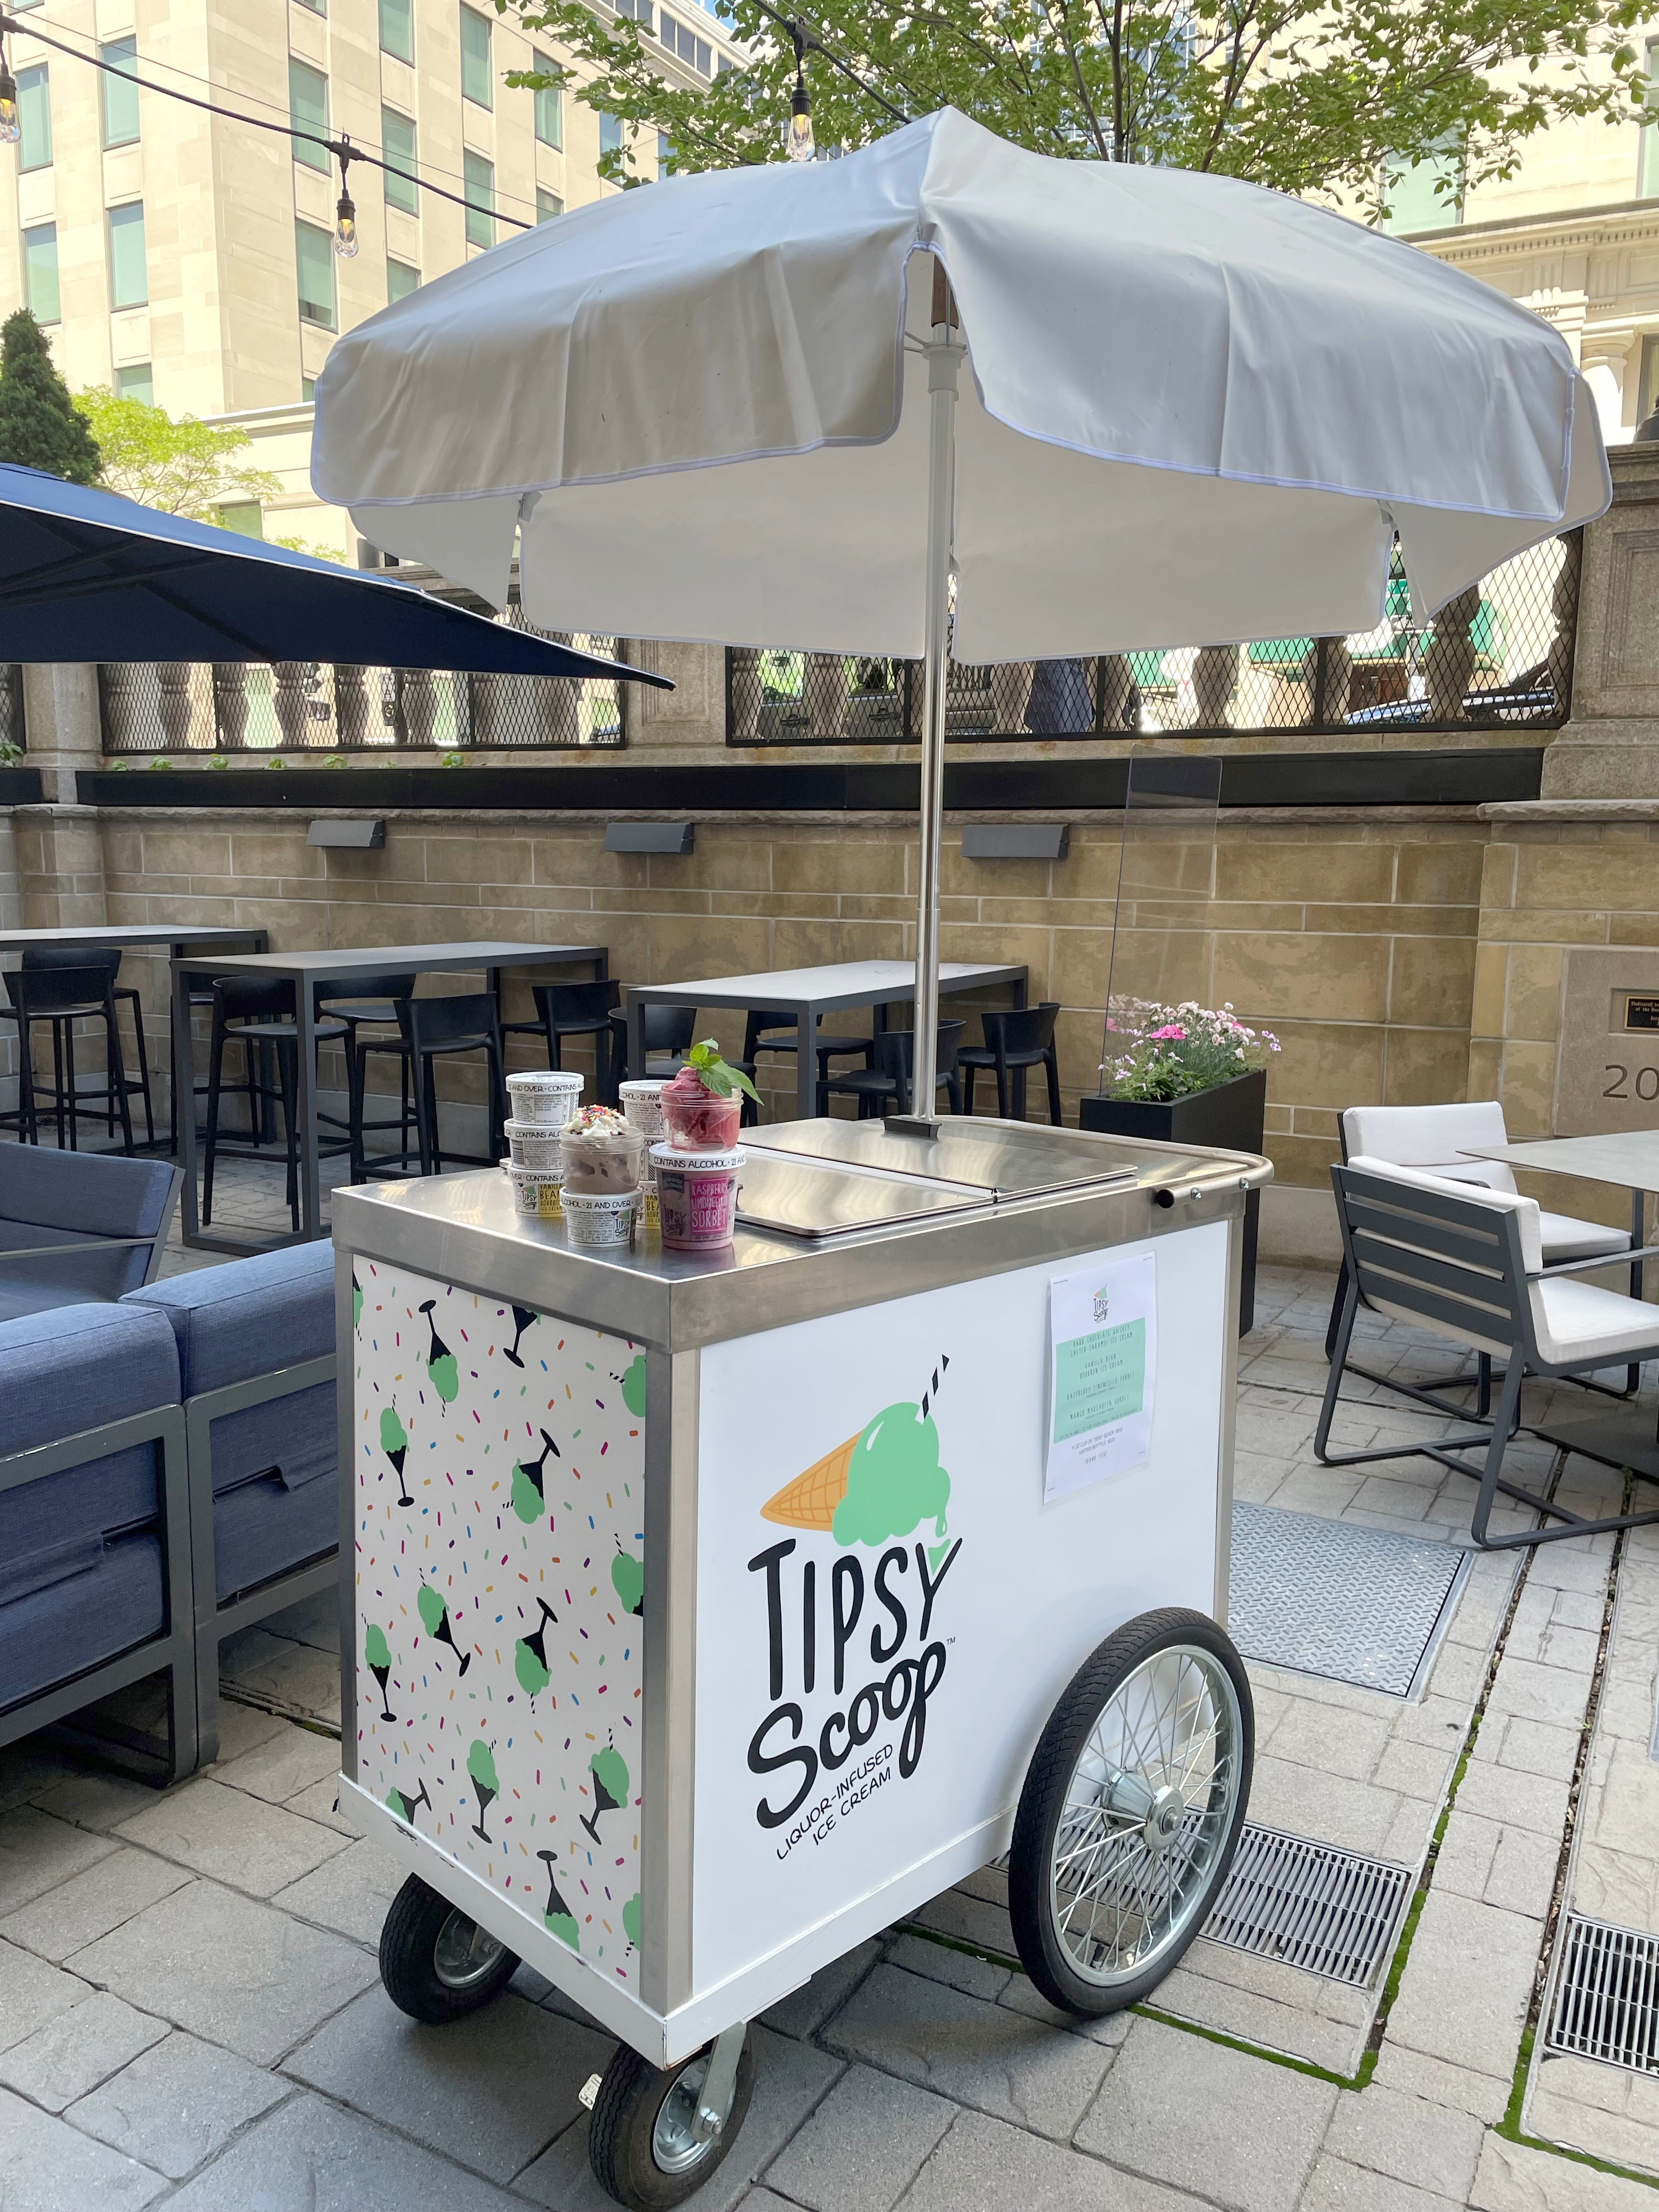 The Tipsy Scoop cart on the patio of the Precinct Kitchen + Bar at the Loews Boston Hotel is serving up flavors like dark chocolate whiskey salted caramel and vanilla bean bourbon through the end of summer.